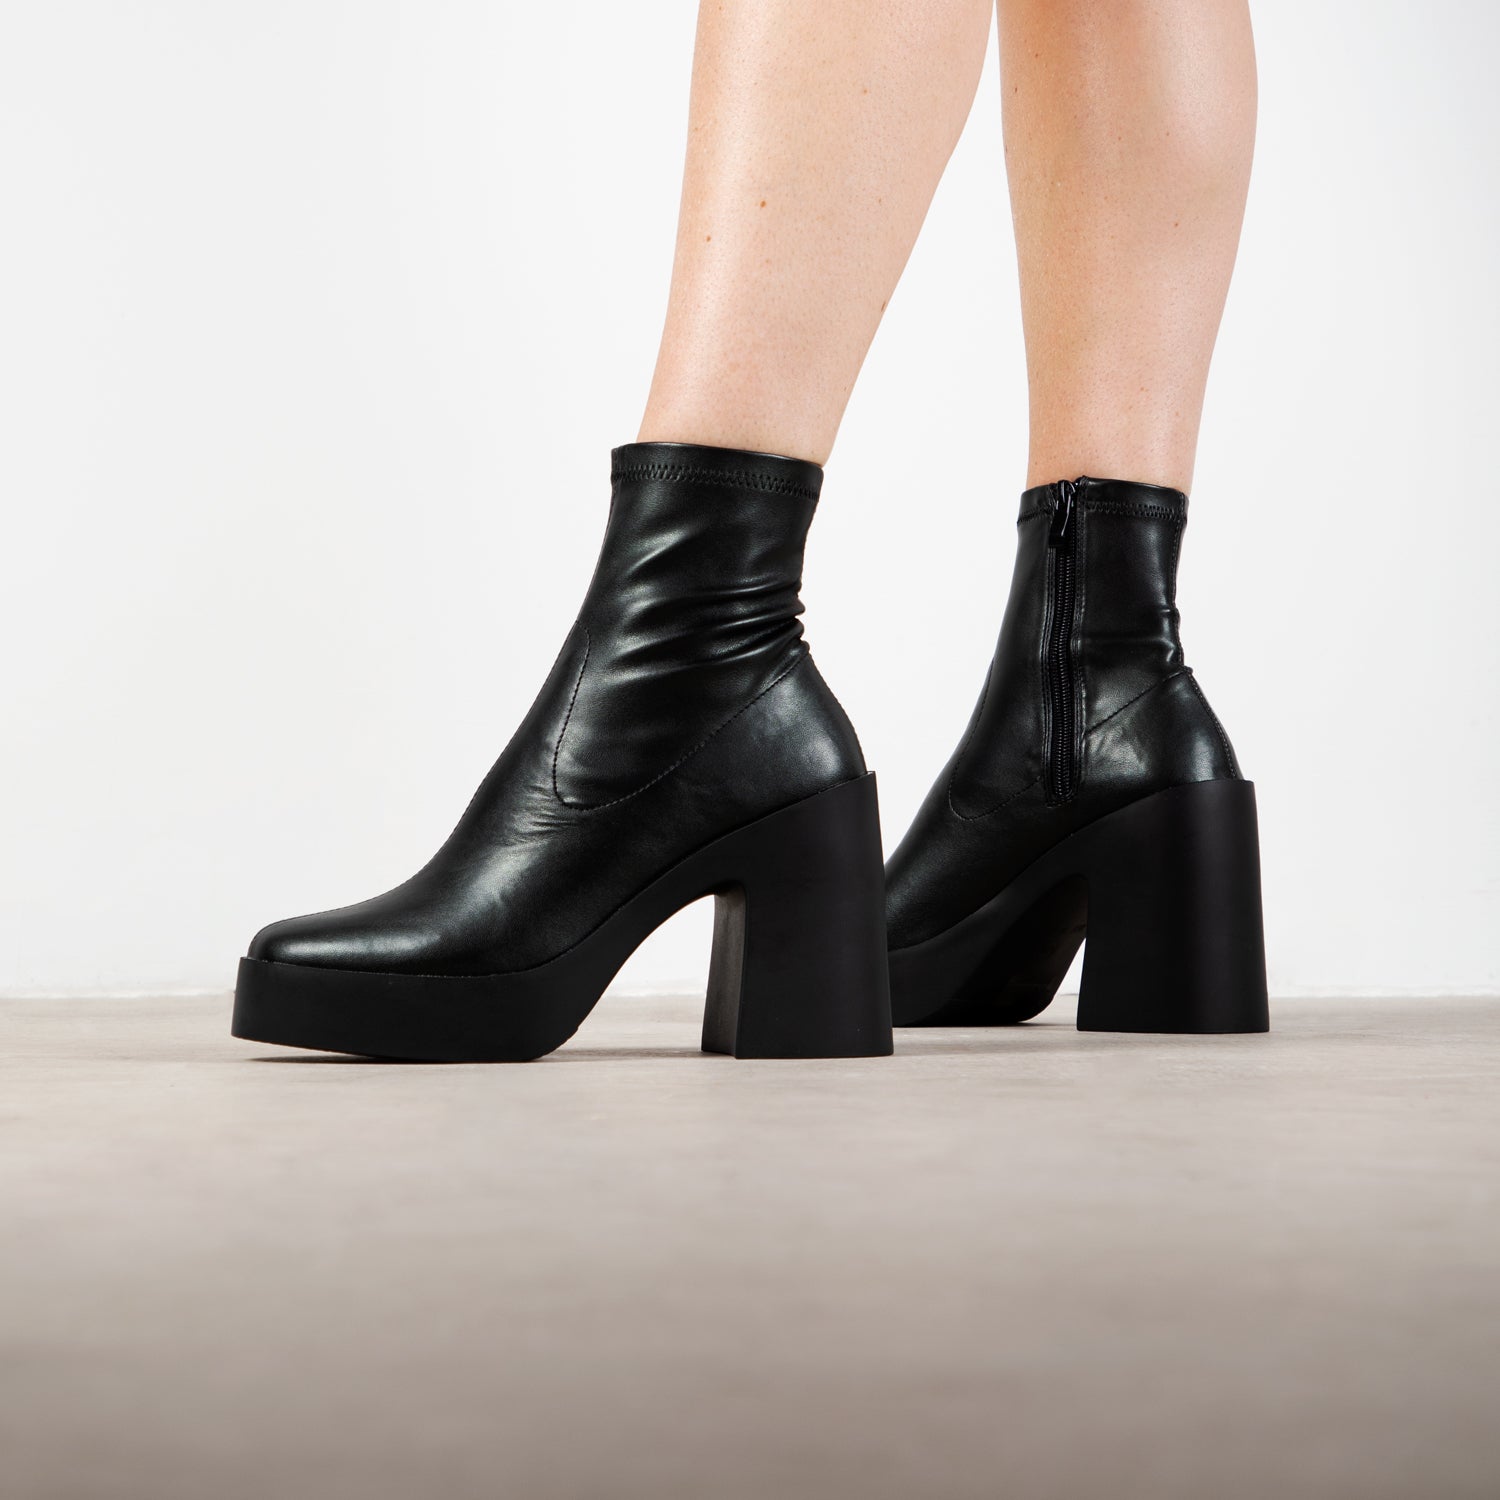 RAID Beena Ankle Boot in Black